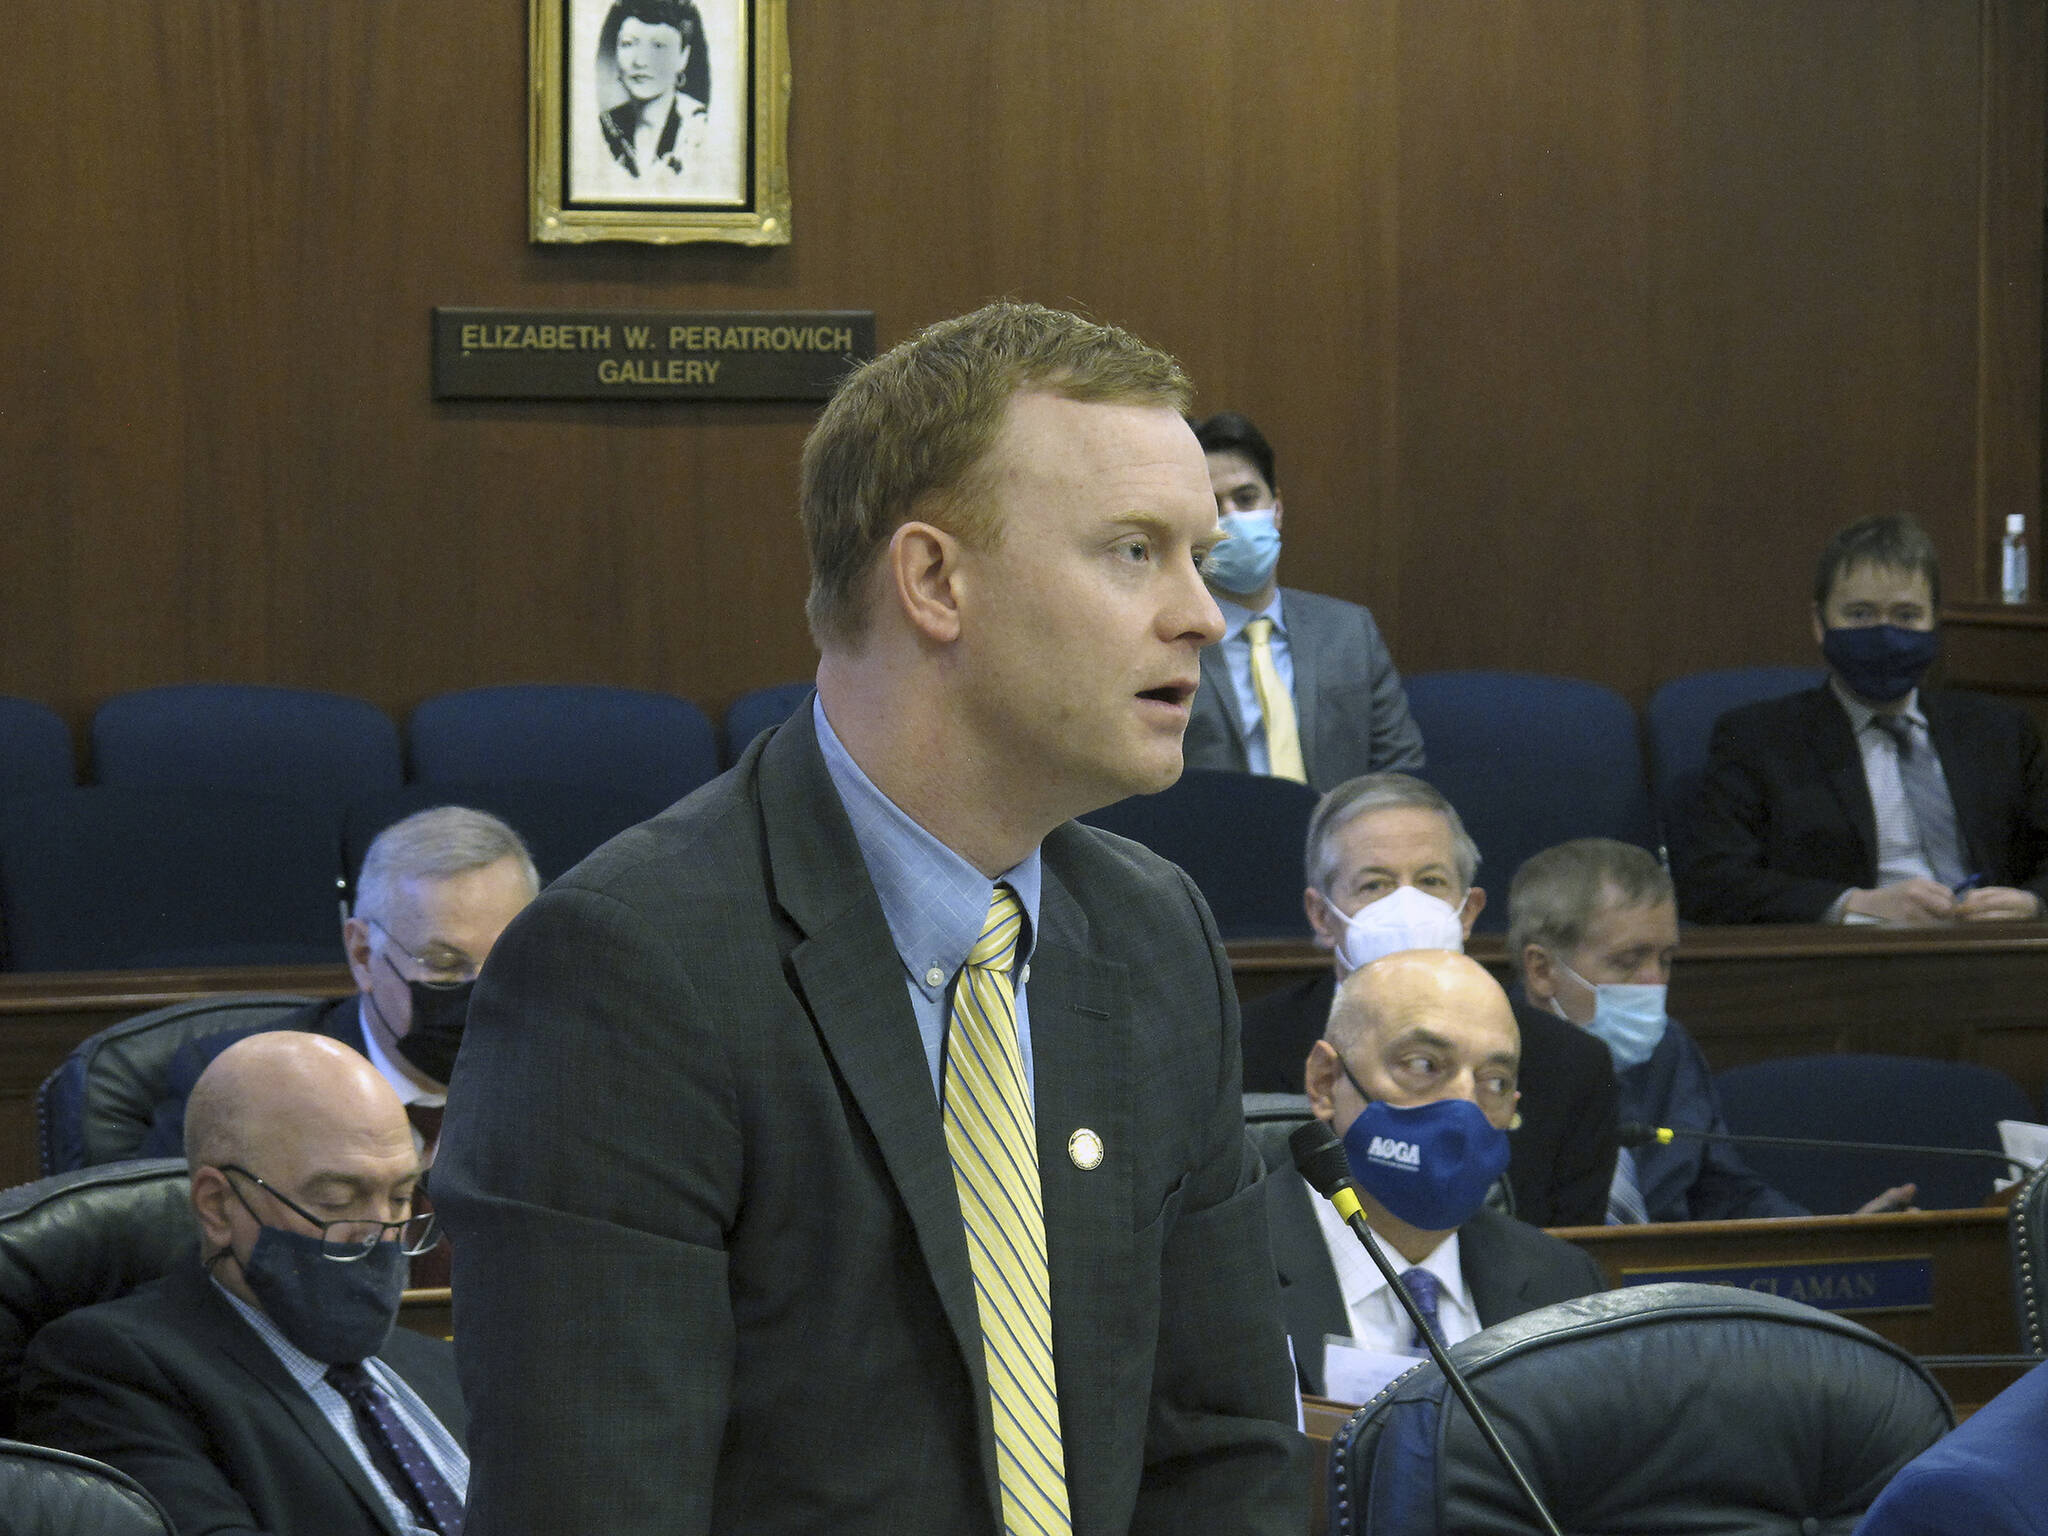 Alaska Republican state Rep. David Eastman speaks on the floor of the Alaska House on Monday, Jan. 31, 2022, in Juneau, Alaska. The Alaska House tabled action Monday on a proposal to remove from legislative committees Eastman, who has said he joined the Oath Keepers far-right organization years ago. The House Committee on Committees voted 5-2 to remove Republican Rep. Eastman of Wasilla from his committee assignments, said Joe Plesha, communications director for the House’s bipartisan majority. (AP Photo / Becky Bohrer)